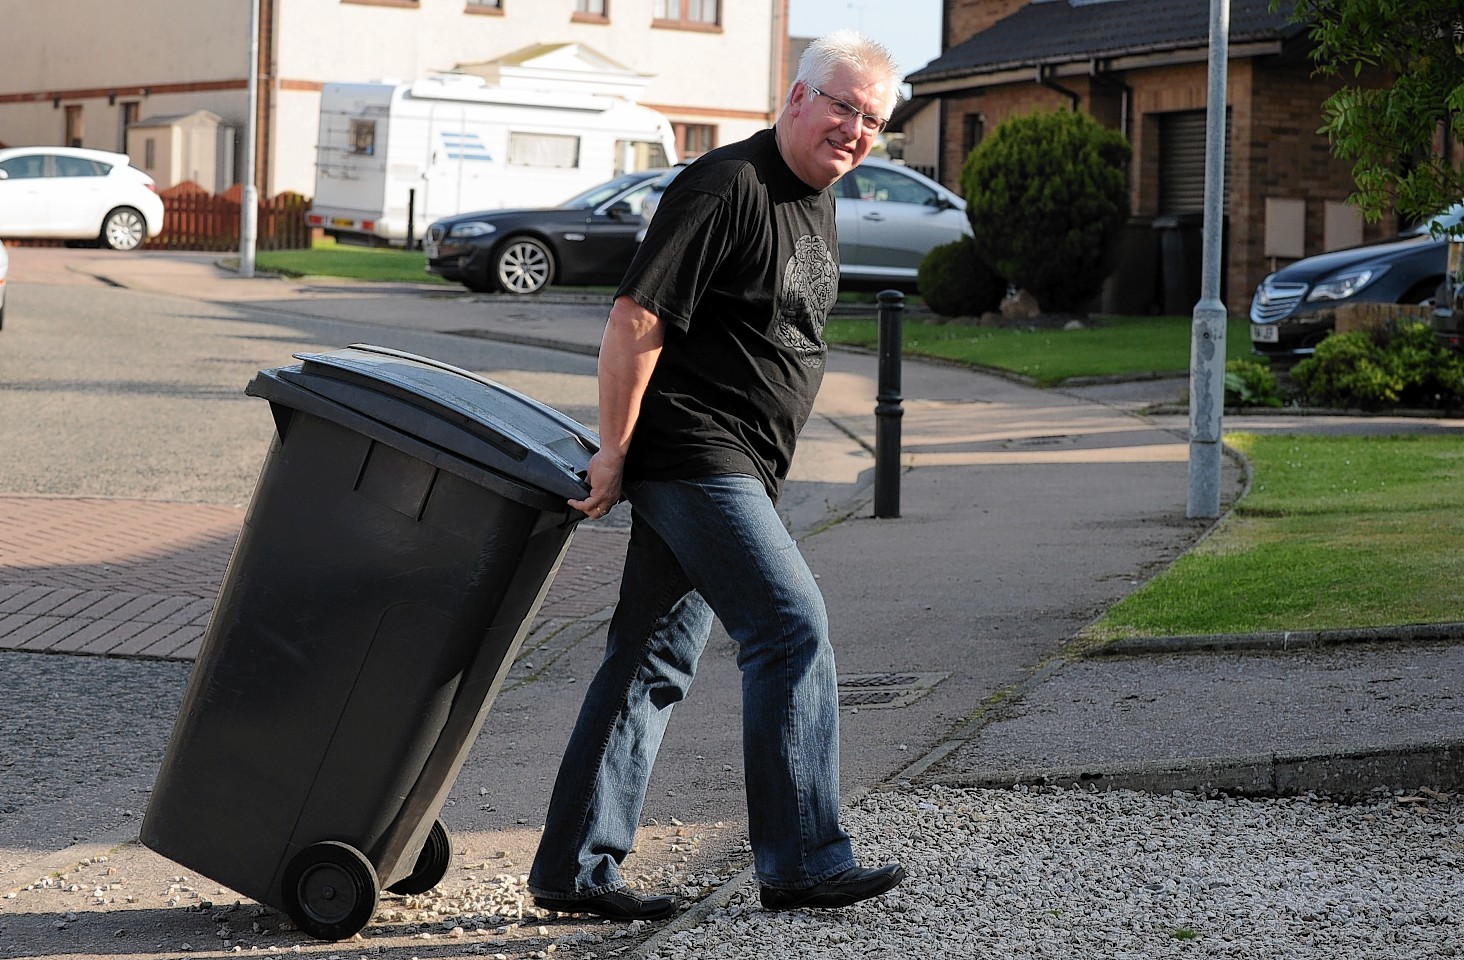 The changes to wheelie bins in Aberdeen are a contentious issue